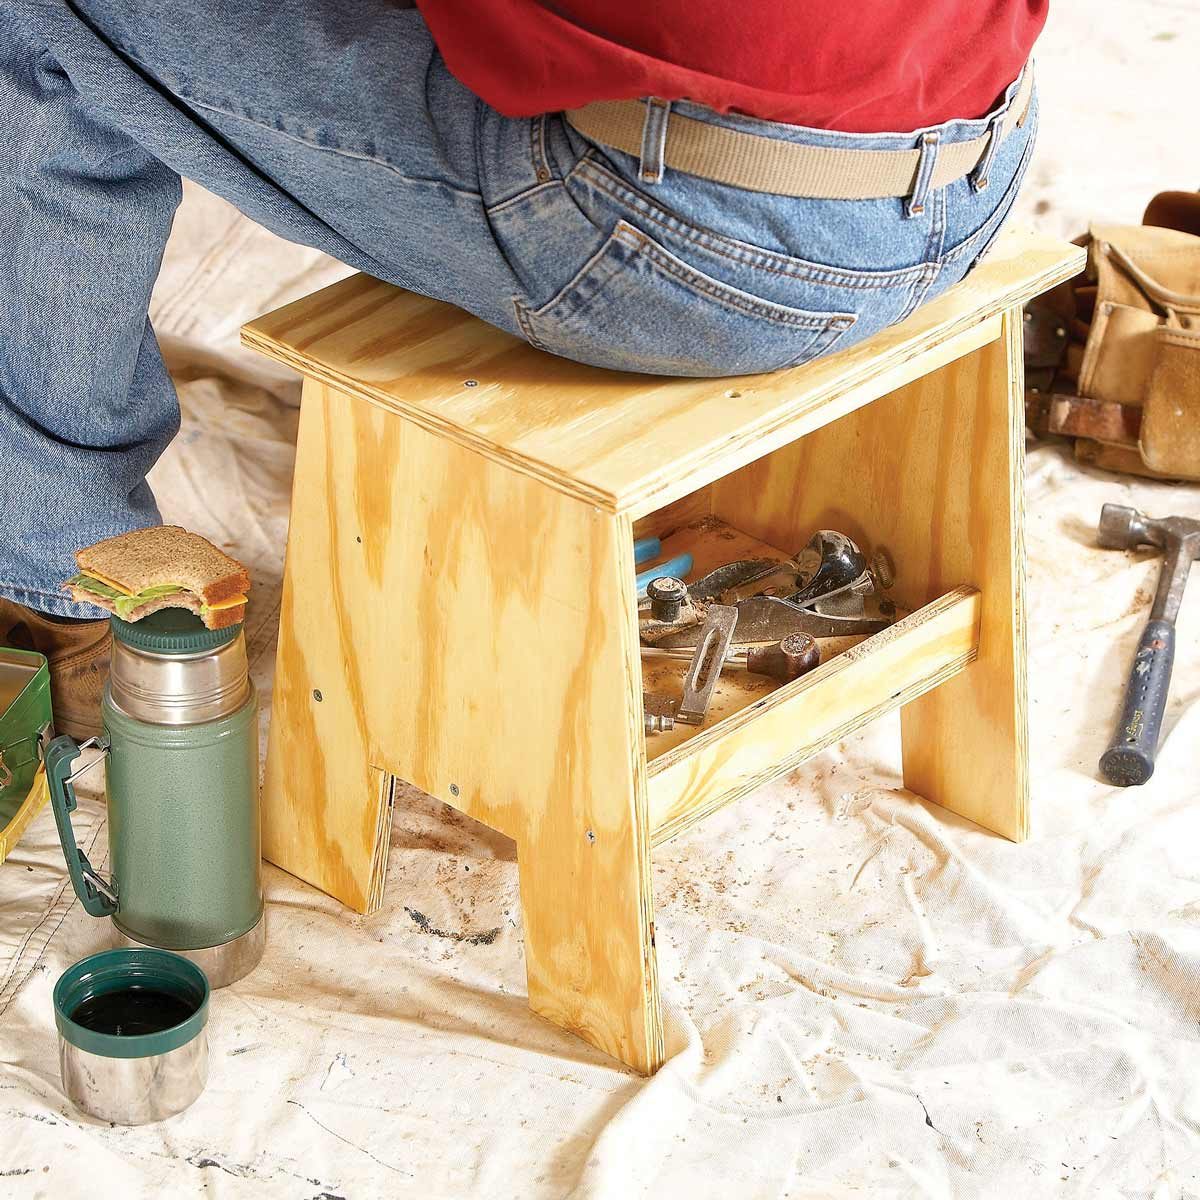 DIY Furniture Projects For Beginners